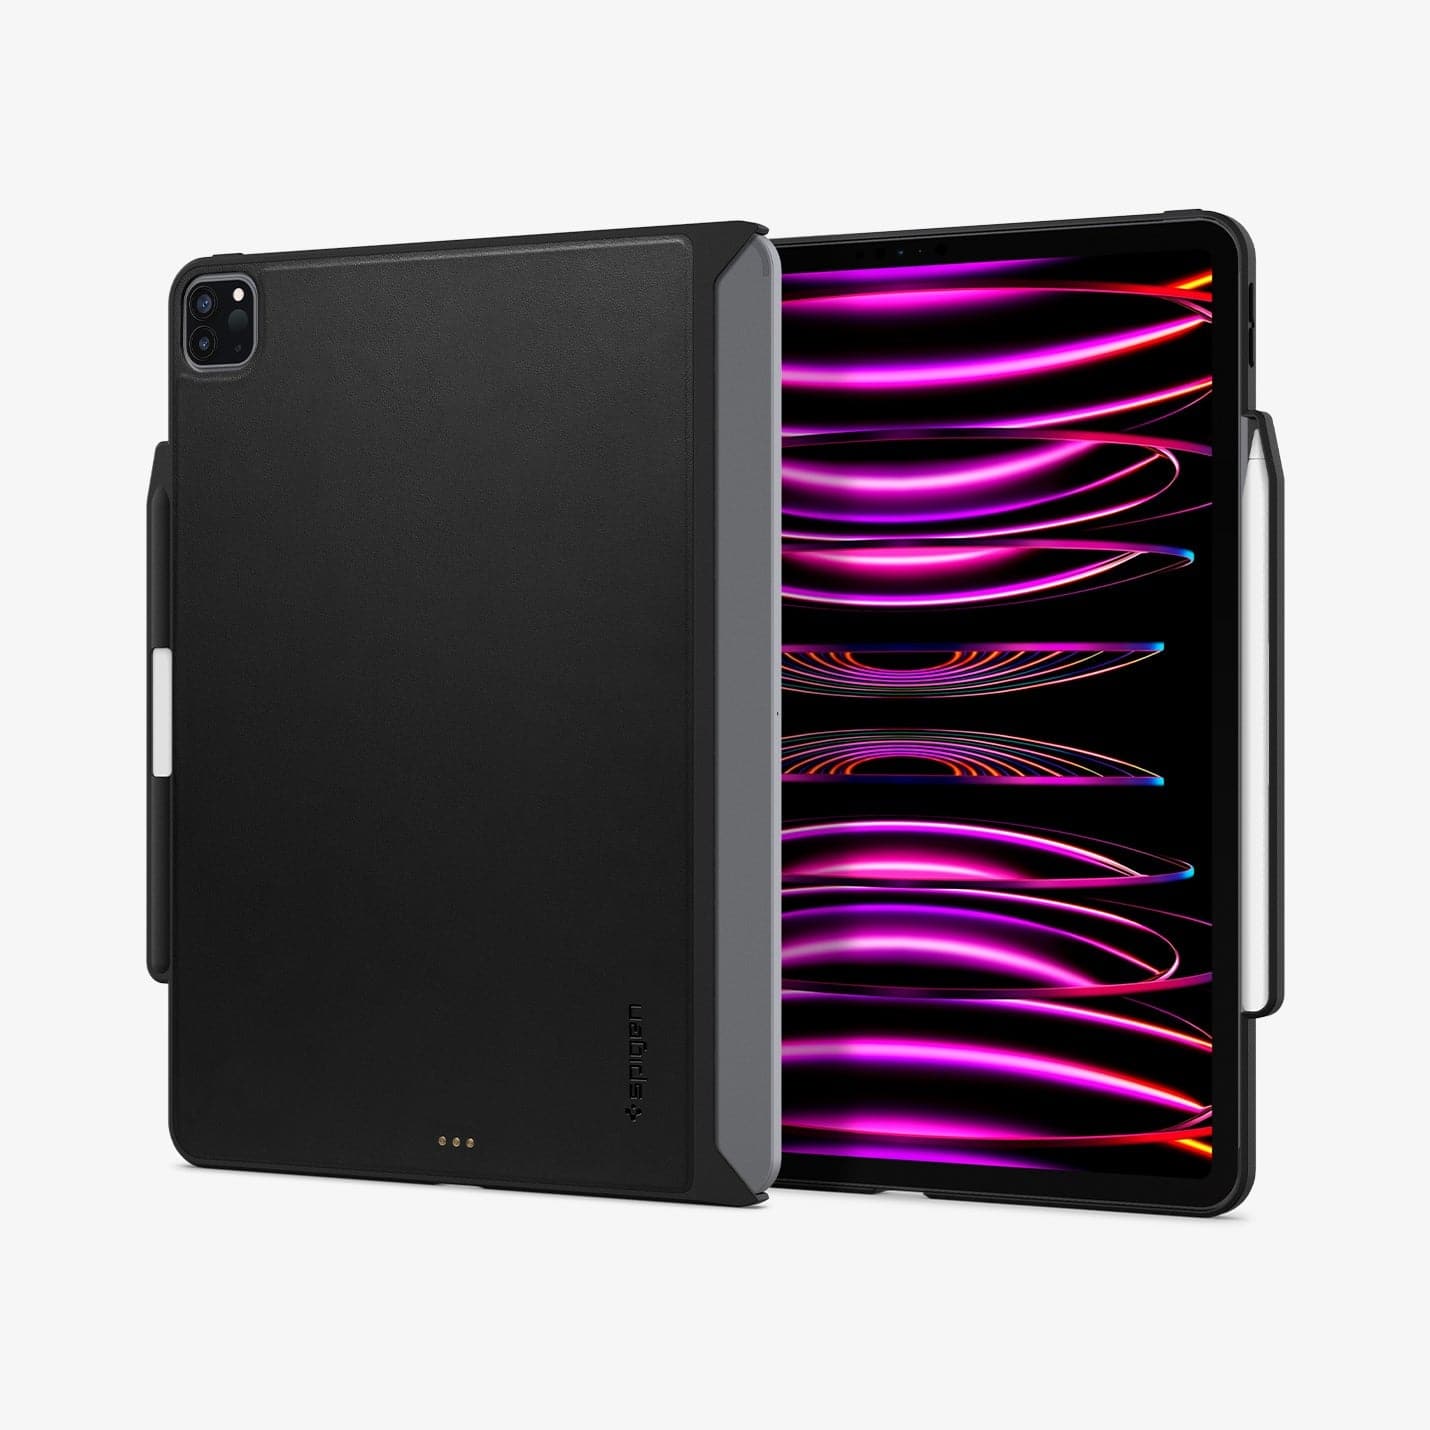 ACS05468 - iPad Pro 12.9" Case Thin Fit Pro in black showing the back and front